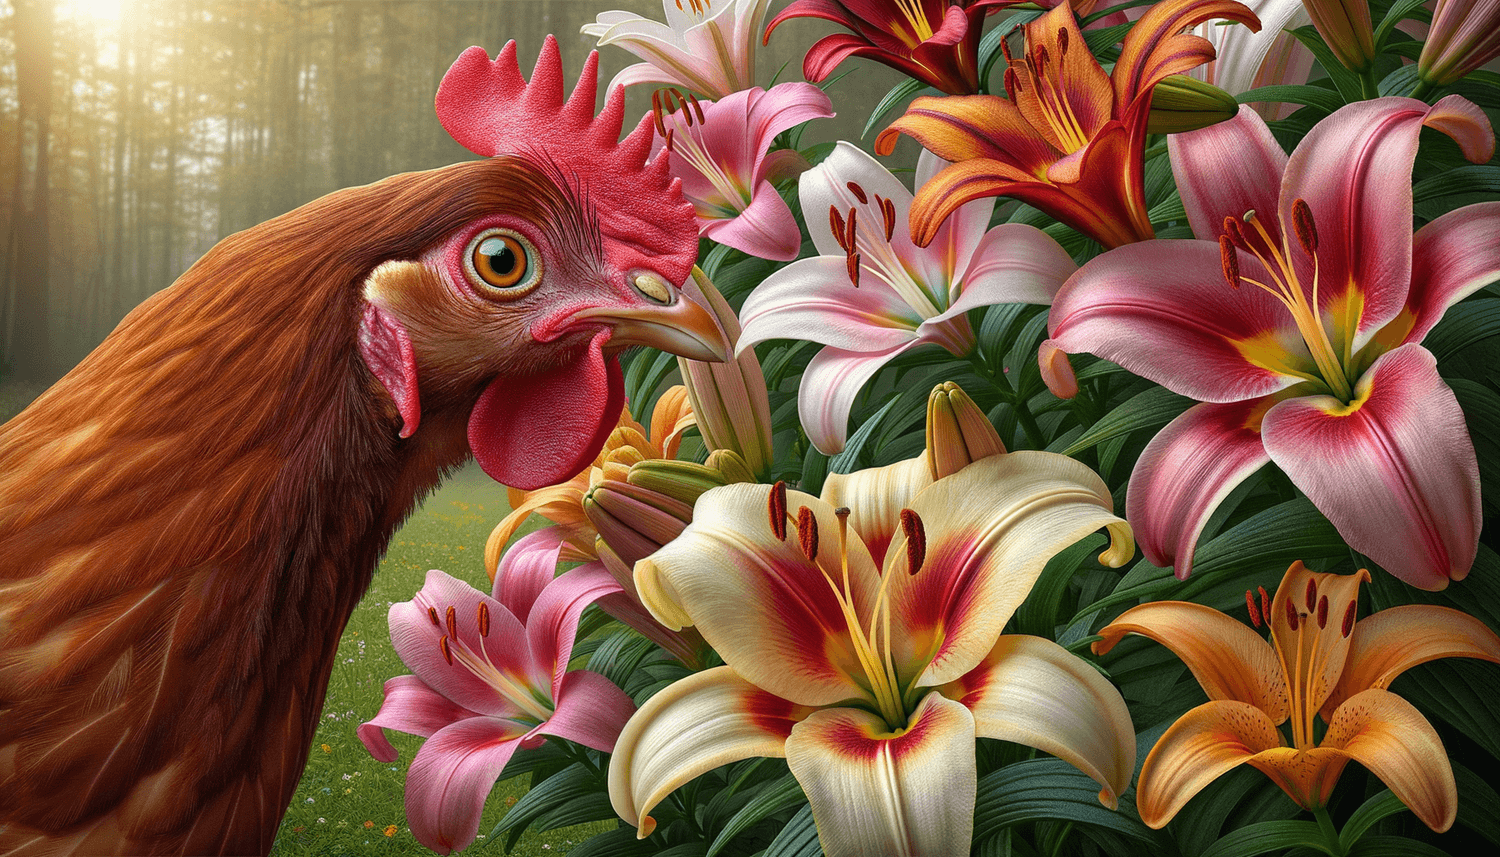 Can Chickens Eat Lilies?